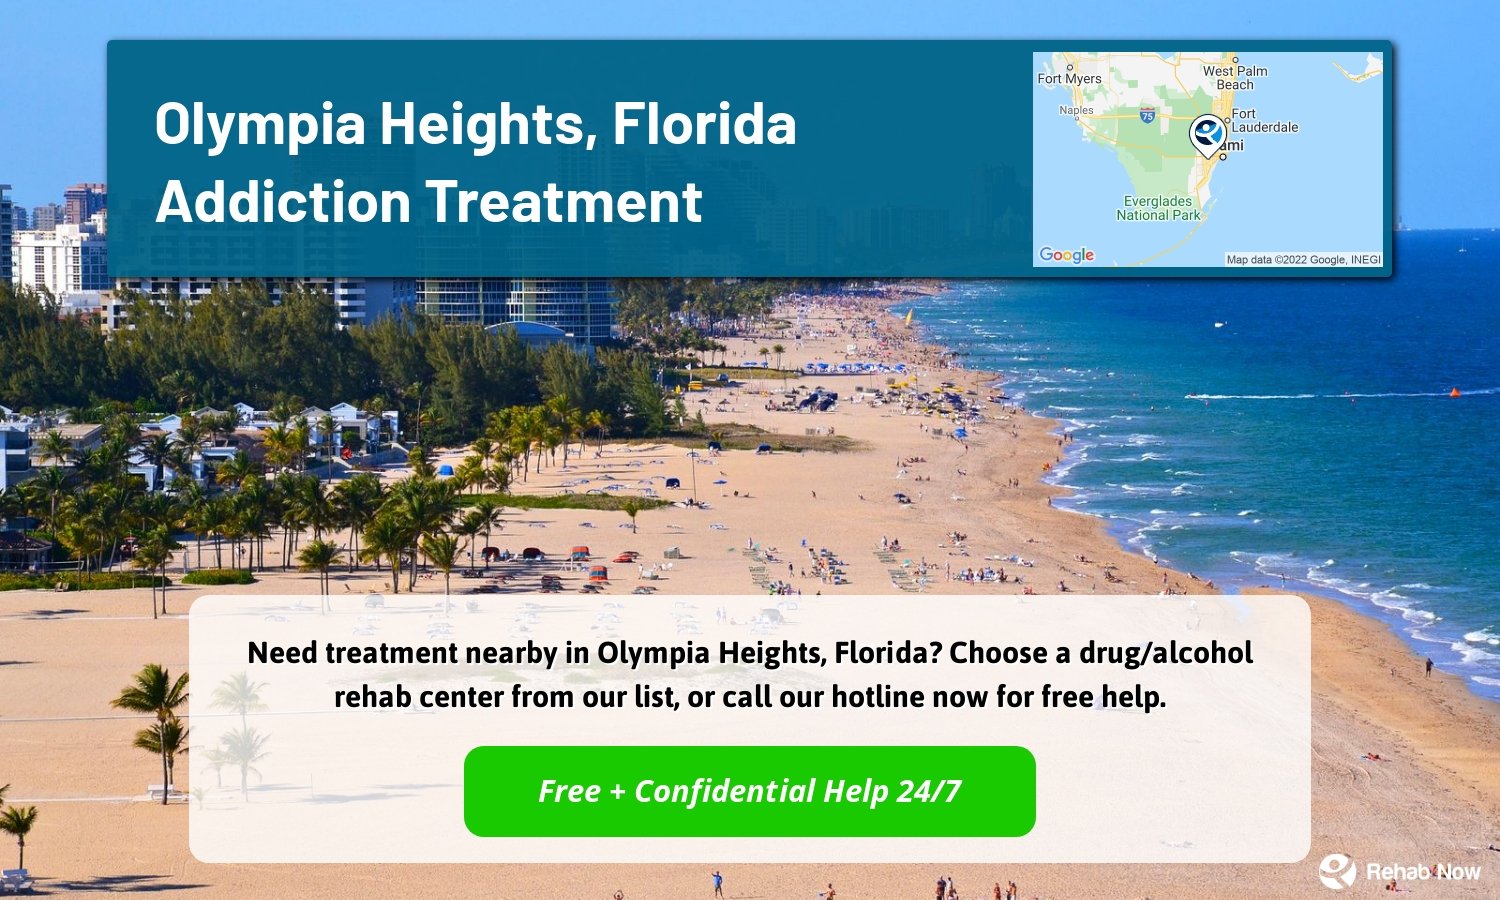 Need treatment nearby in Olympia Heights, Florida? Choose a drug/alcohol rehab center from our list, or call our hotline now for free help.